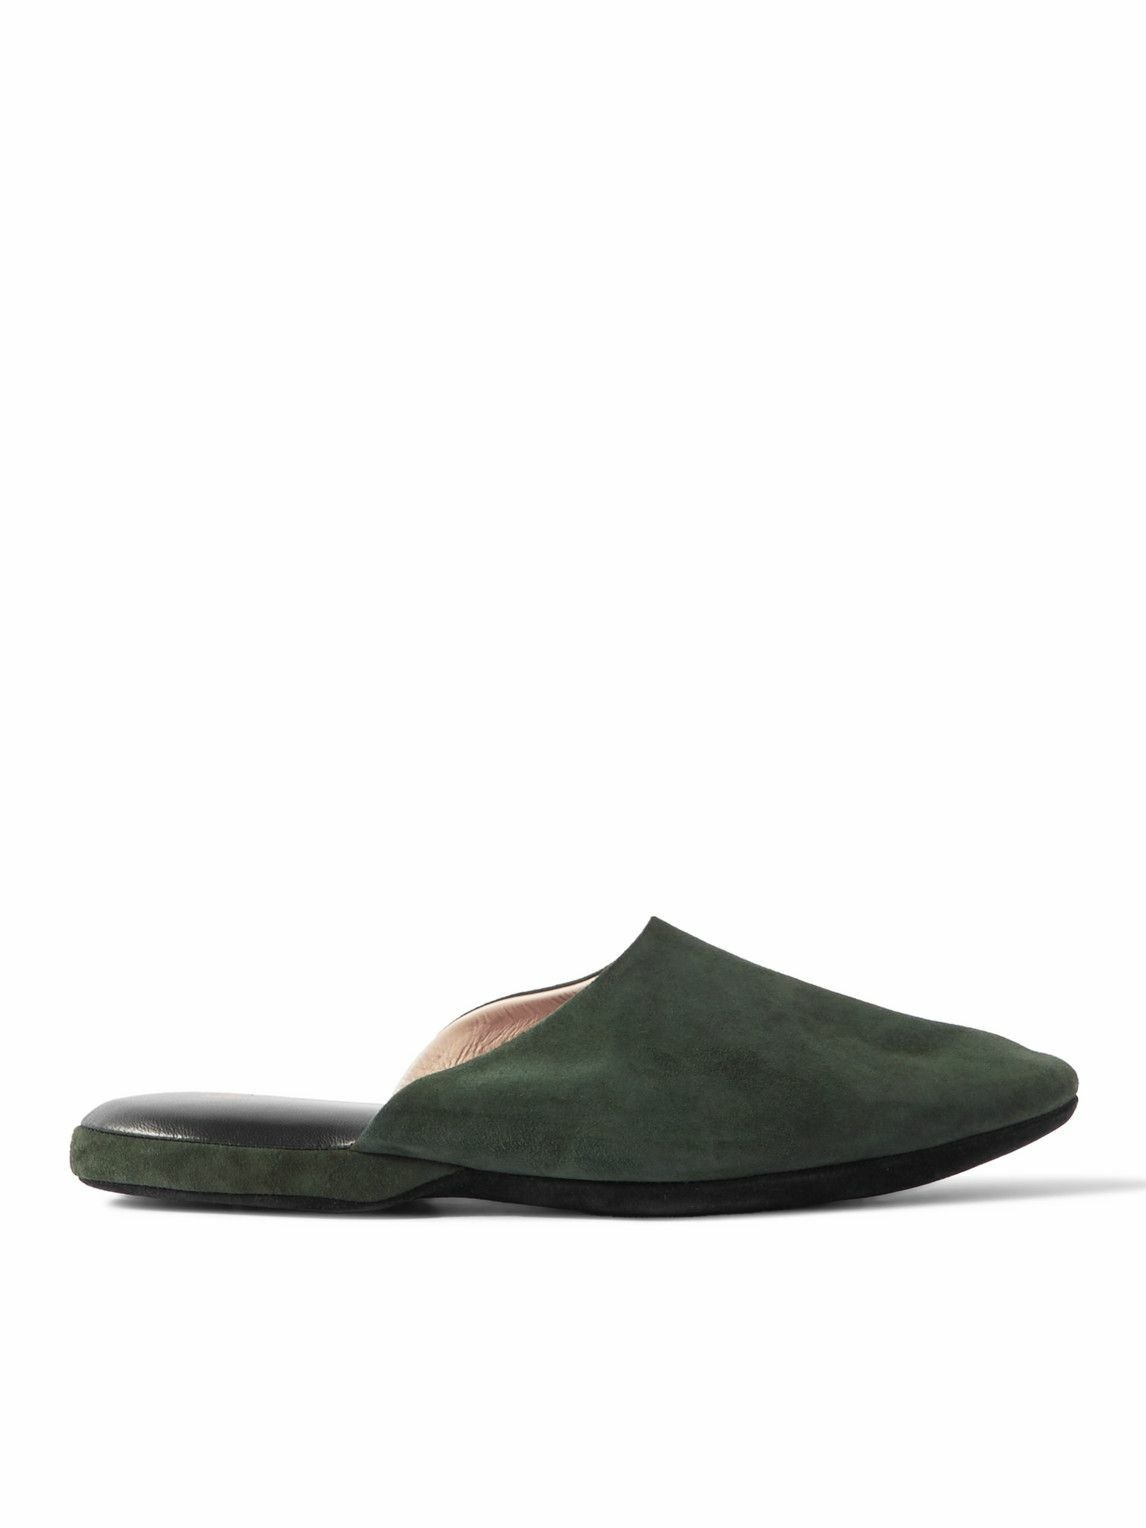 Photo: Charvet - Suede Slippers - Green